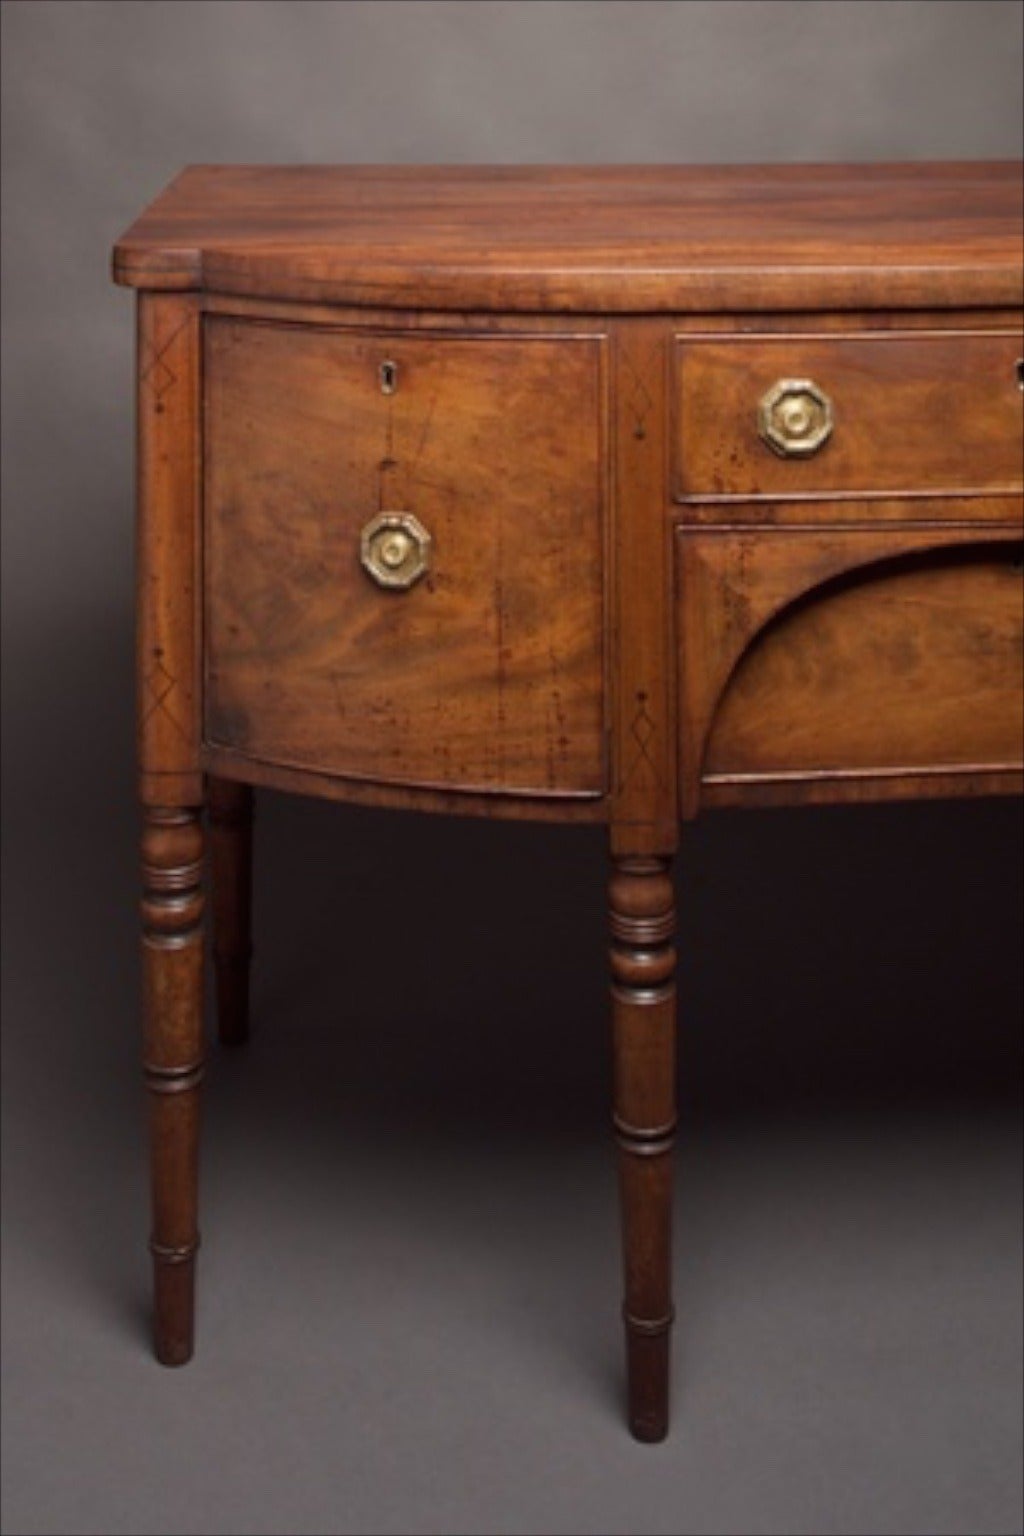 5,850.00.

A George III mahogany bow front sideboard with one cupboard, two drawers to the frieze and a drawer to the other end. The ebonized string inlay dating the piece to after the death of Nelson. The whole standing upon turned legs. The